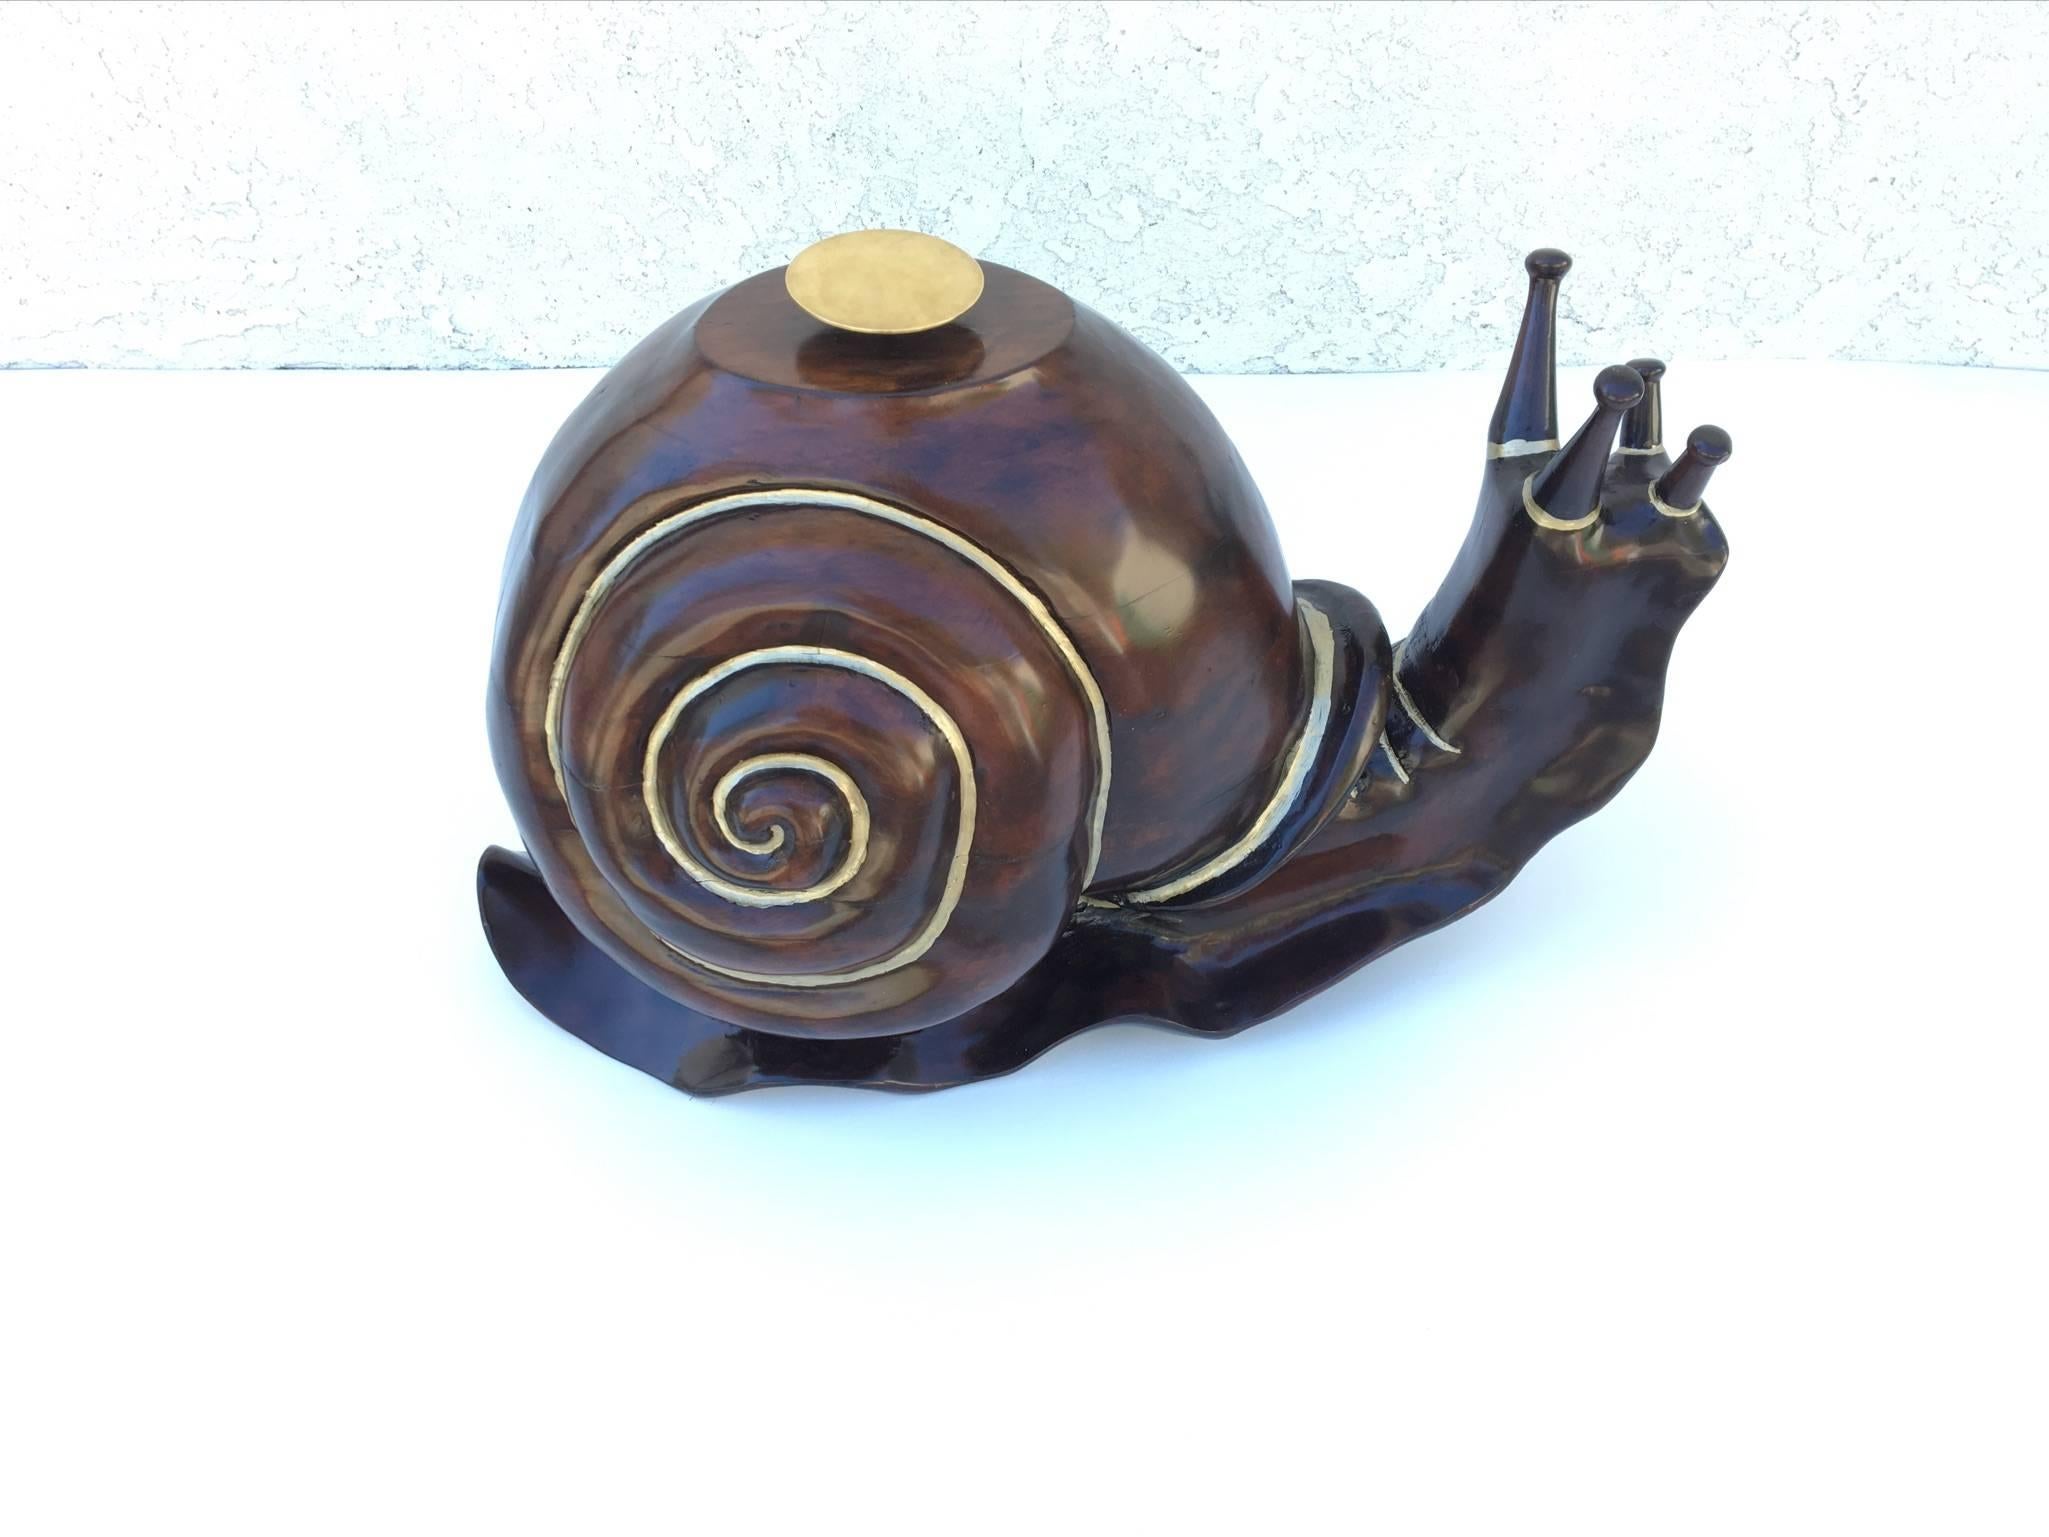 Stained Carved Pinewood and Glass Snail Cocktail Table by Federico Armijo